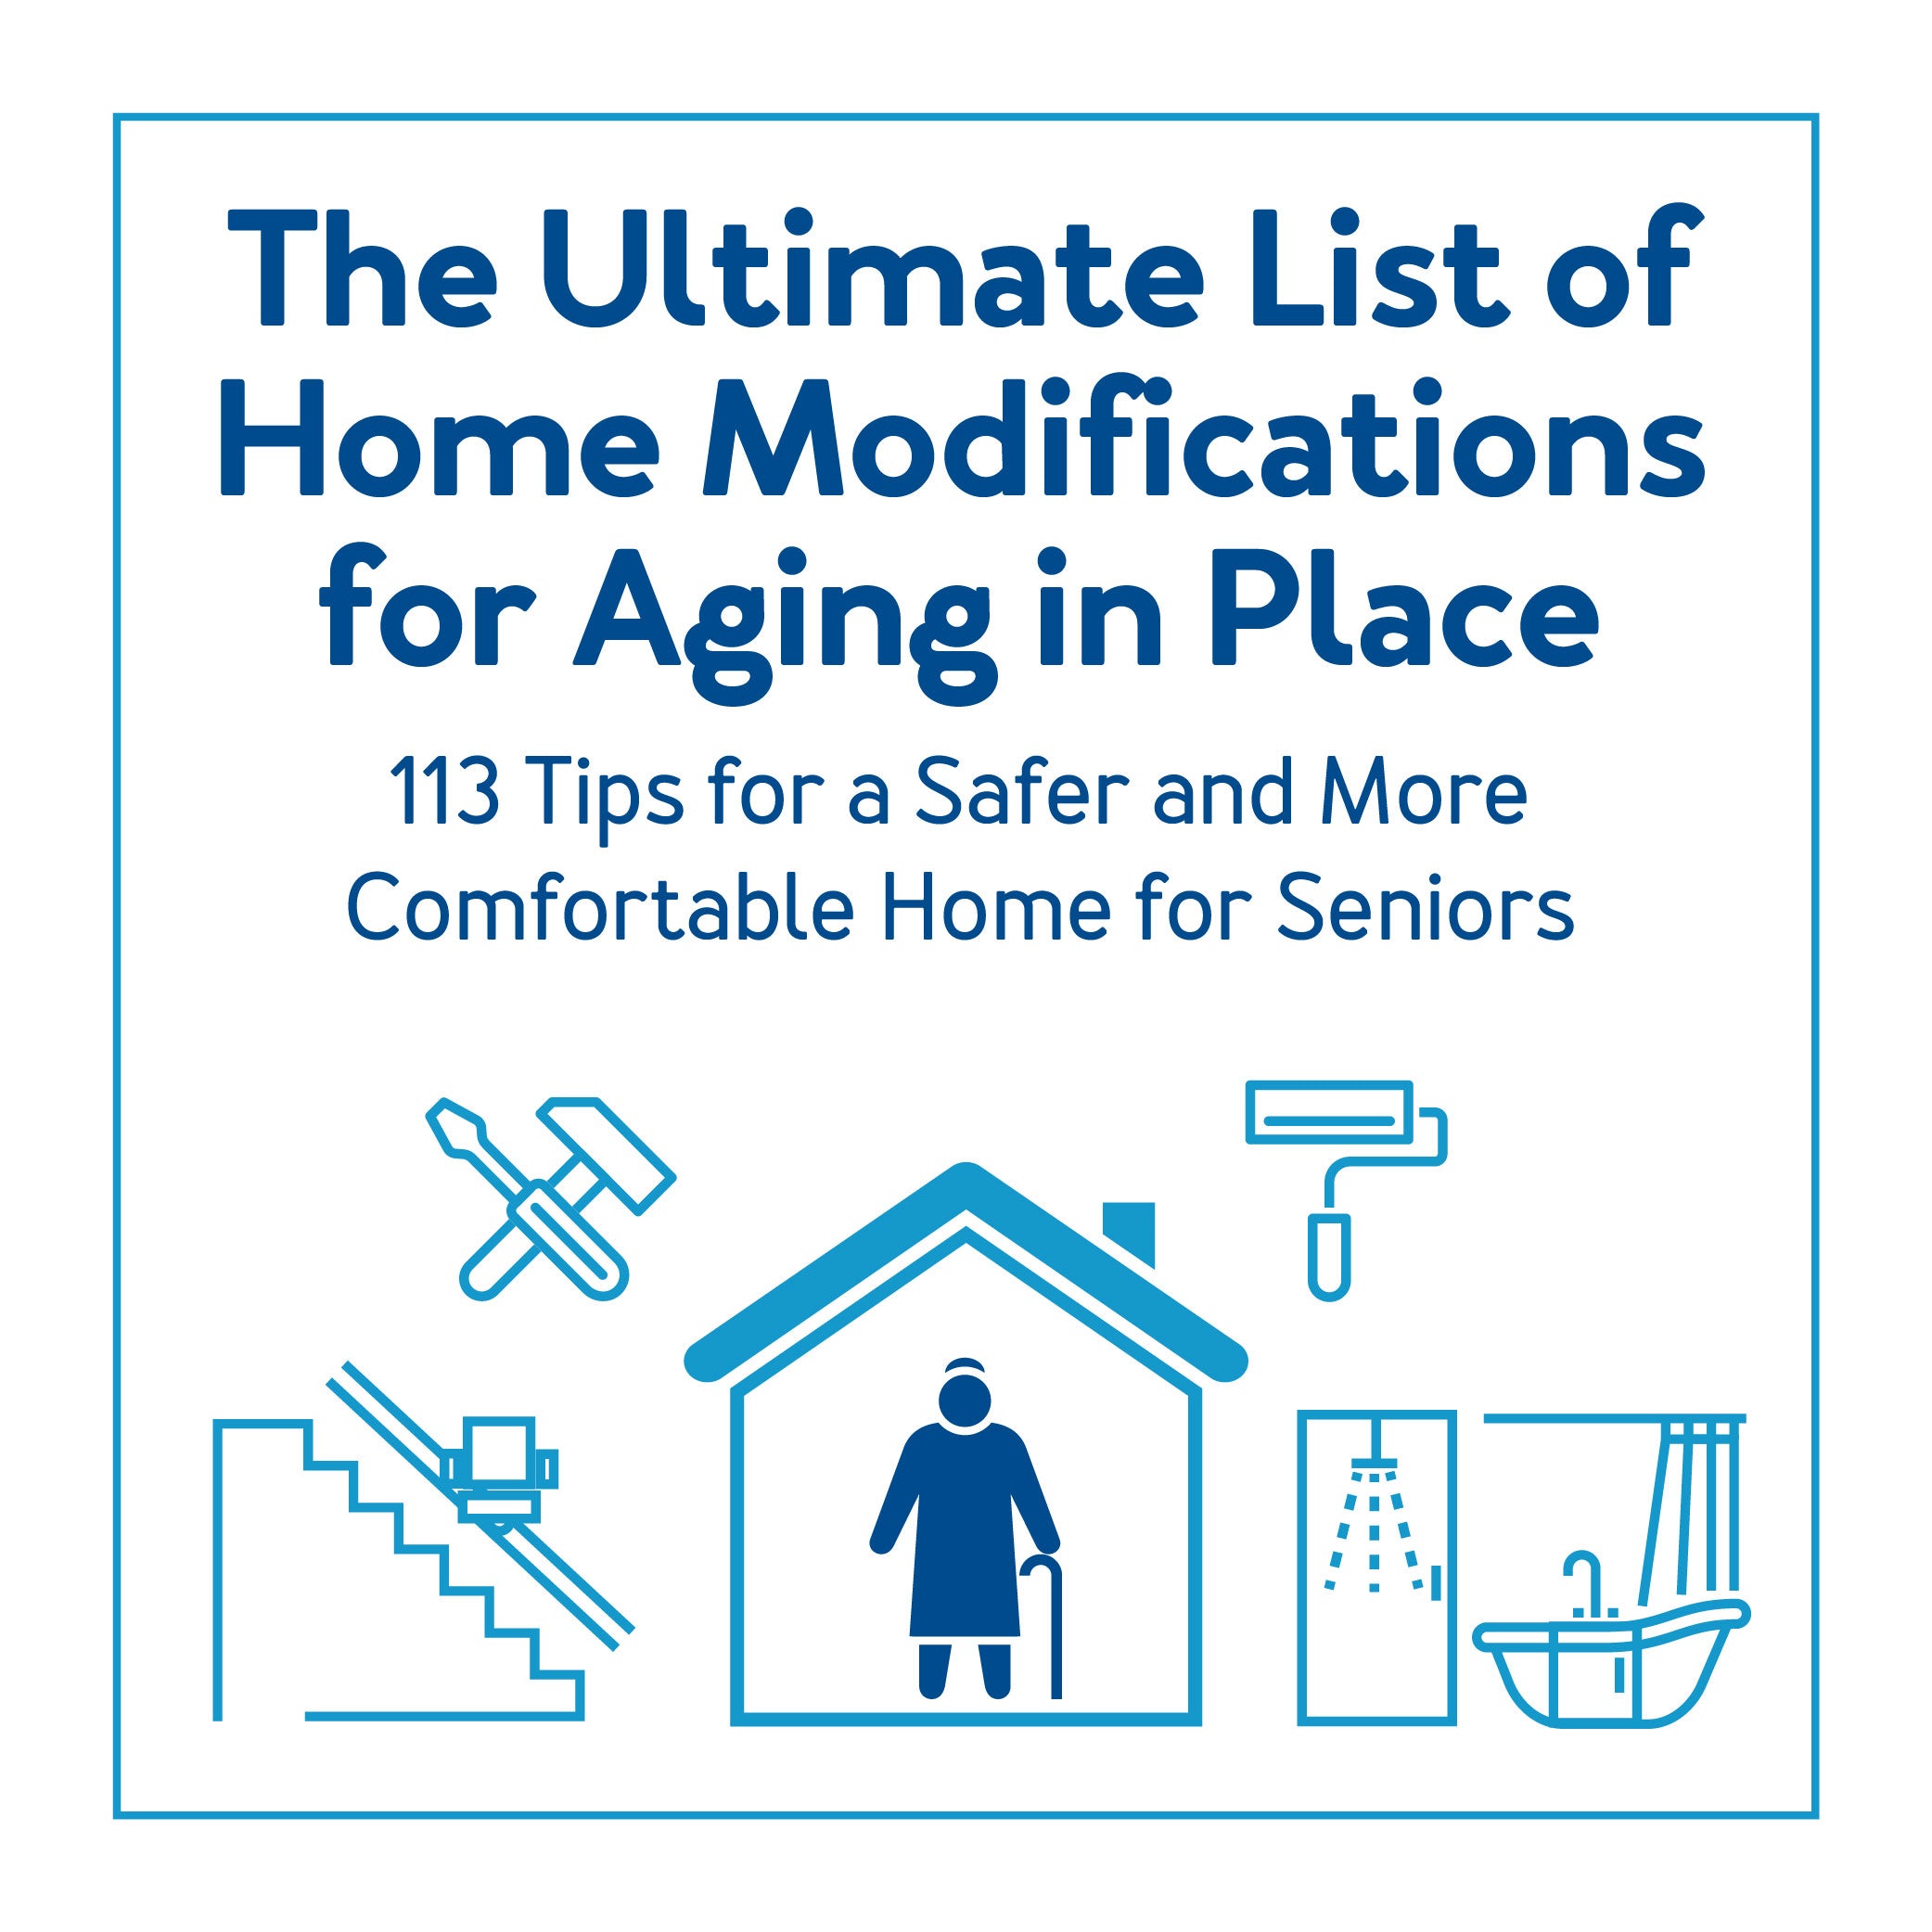 The Ultimate List of Aging in Place Home Modifications